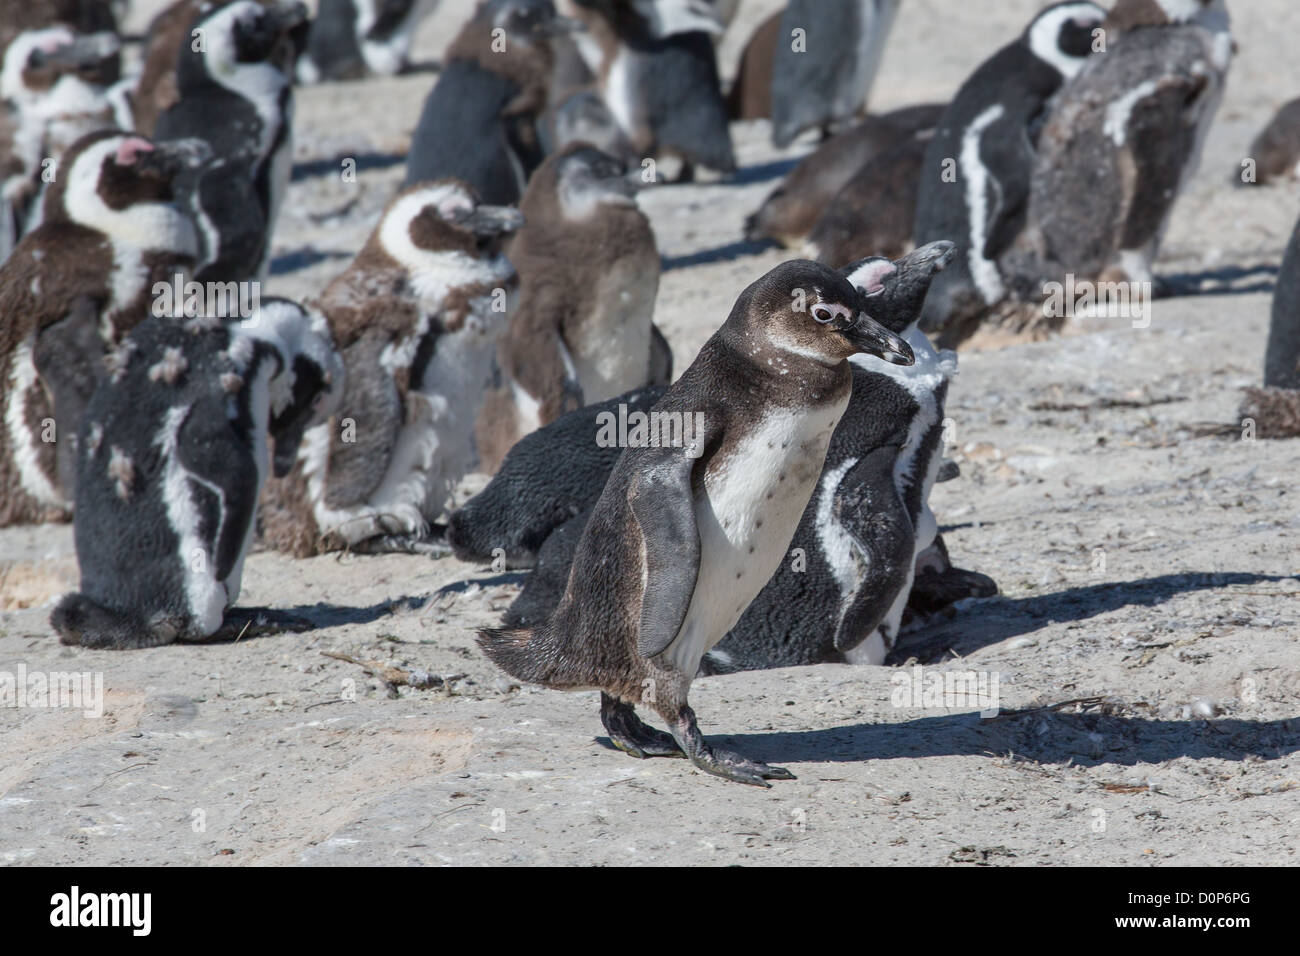 African penguins or Black-footed Penguin at South Africa’s Table Mountain National Park Stock Photo